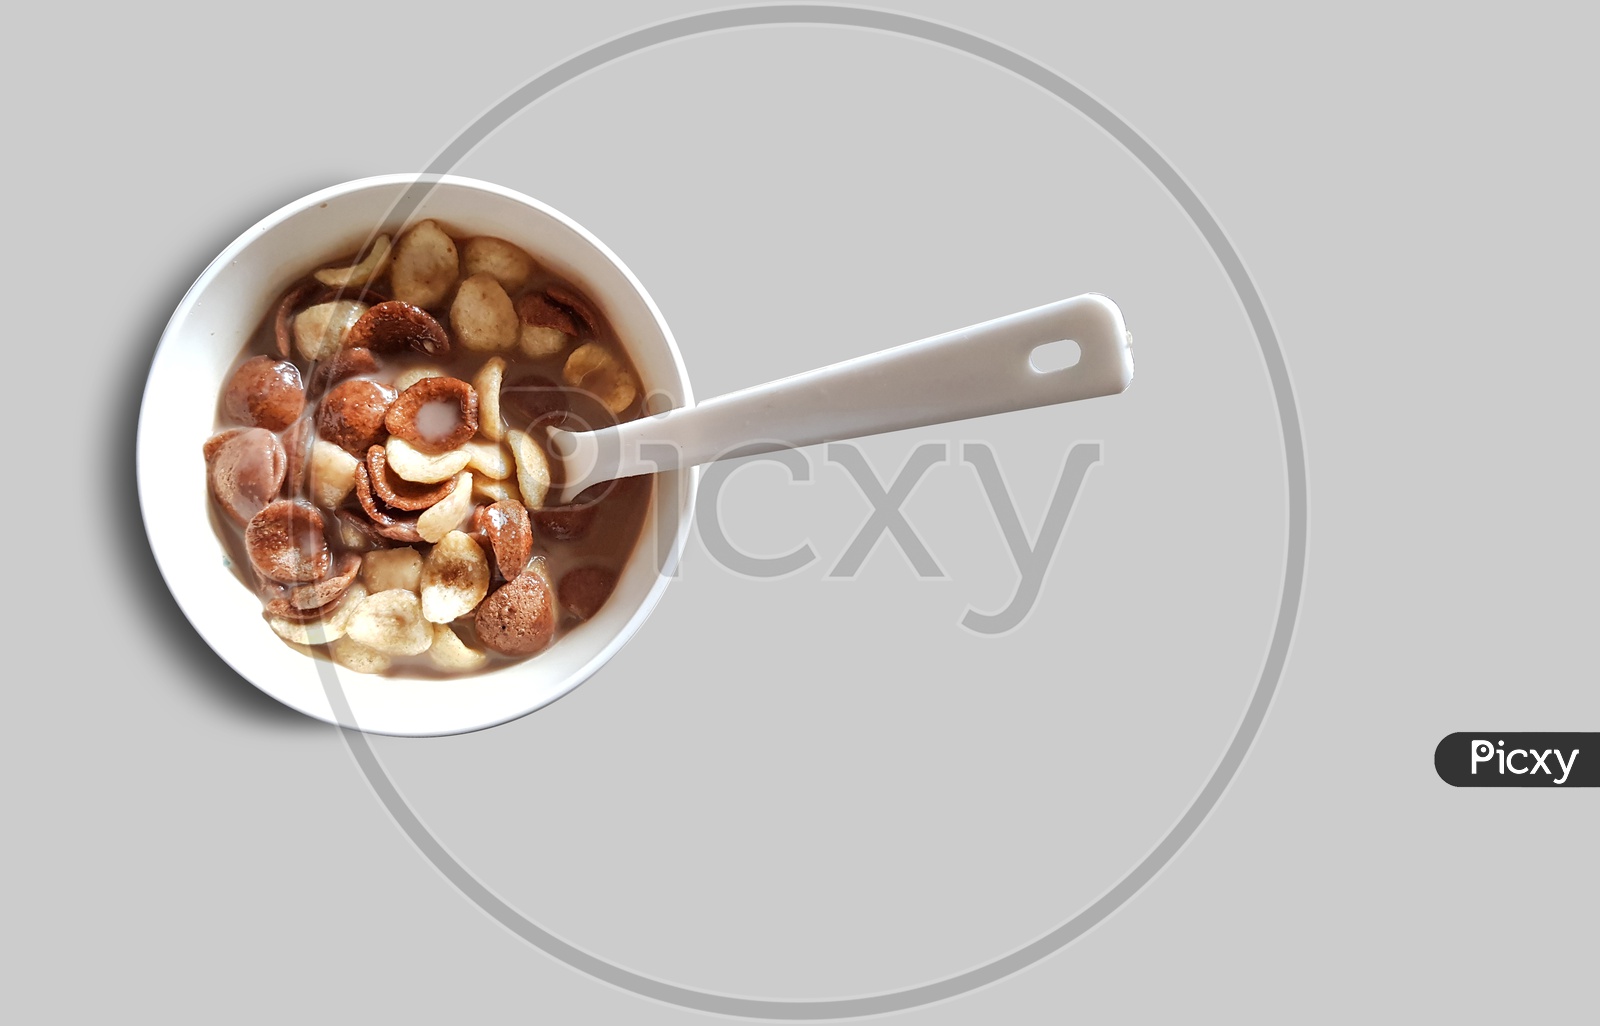 Vanilla And Chocolate Cornflakes Dipped In Chocolate Milk In A White Bowl In Light Background With Spoon